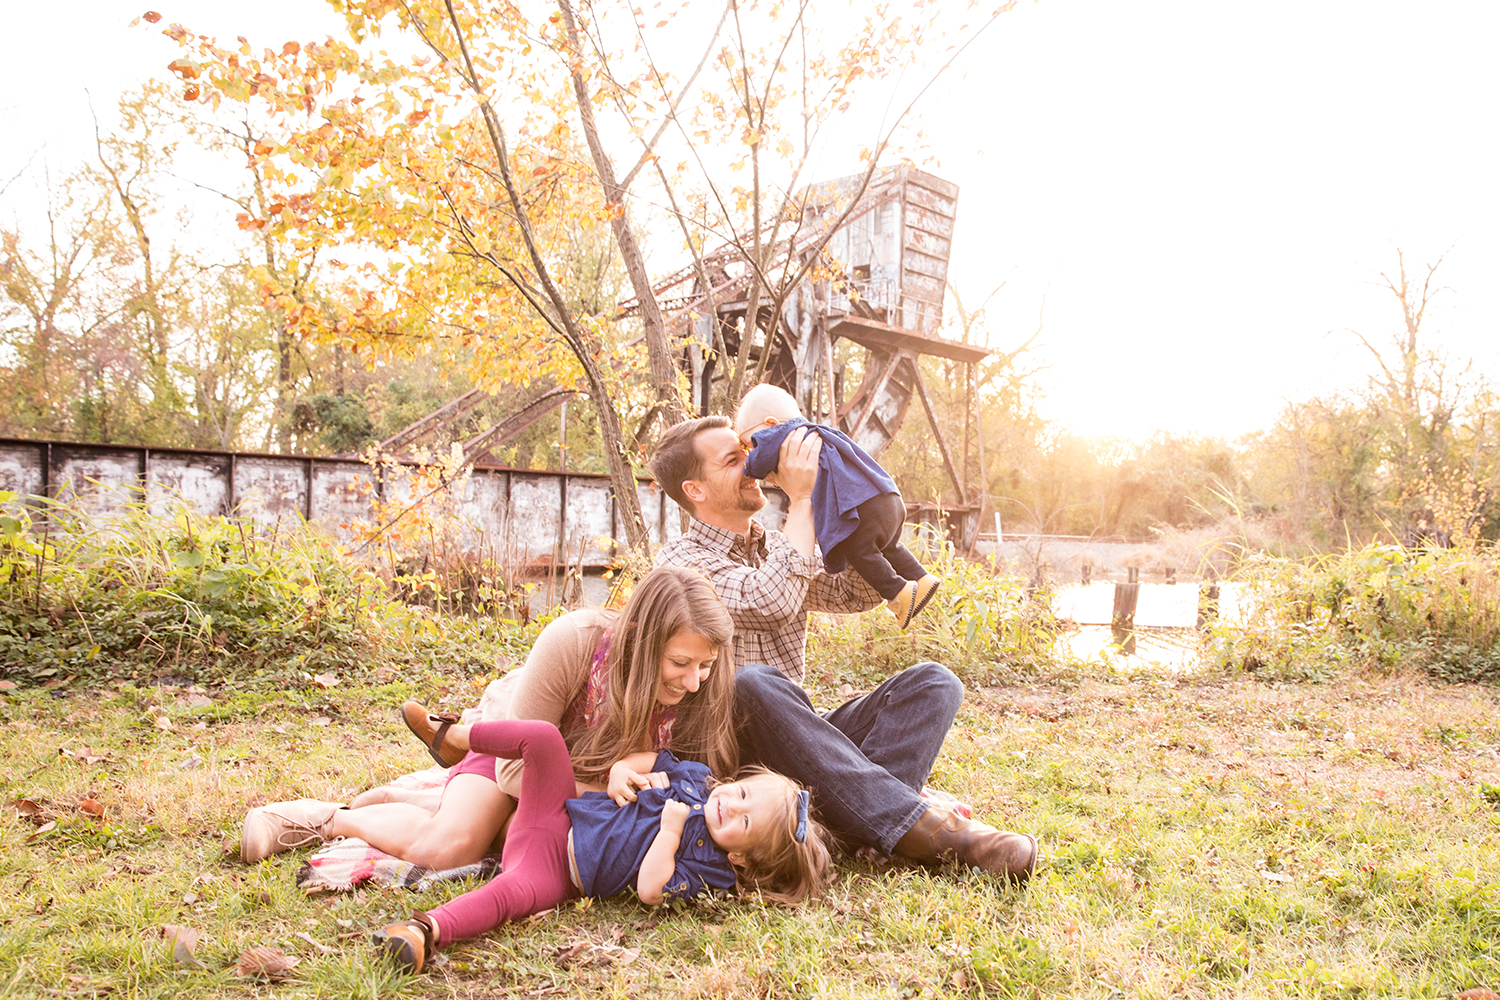 Best Lenses to Use For Family Portrait and Kids Photography - Image Property of www.j-dphoto.com